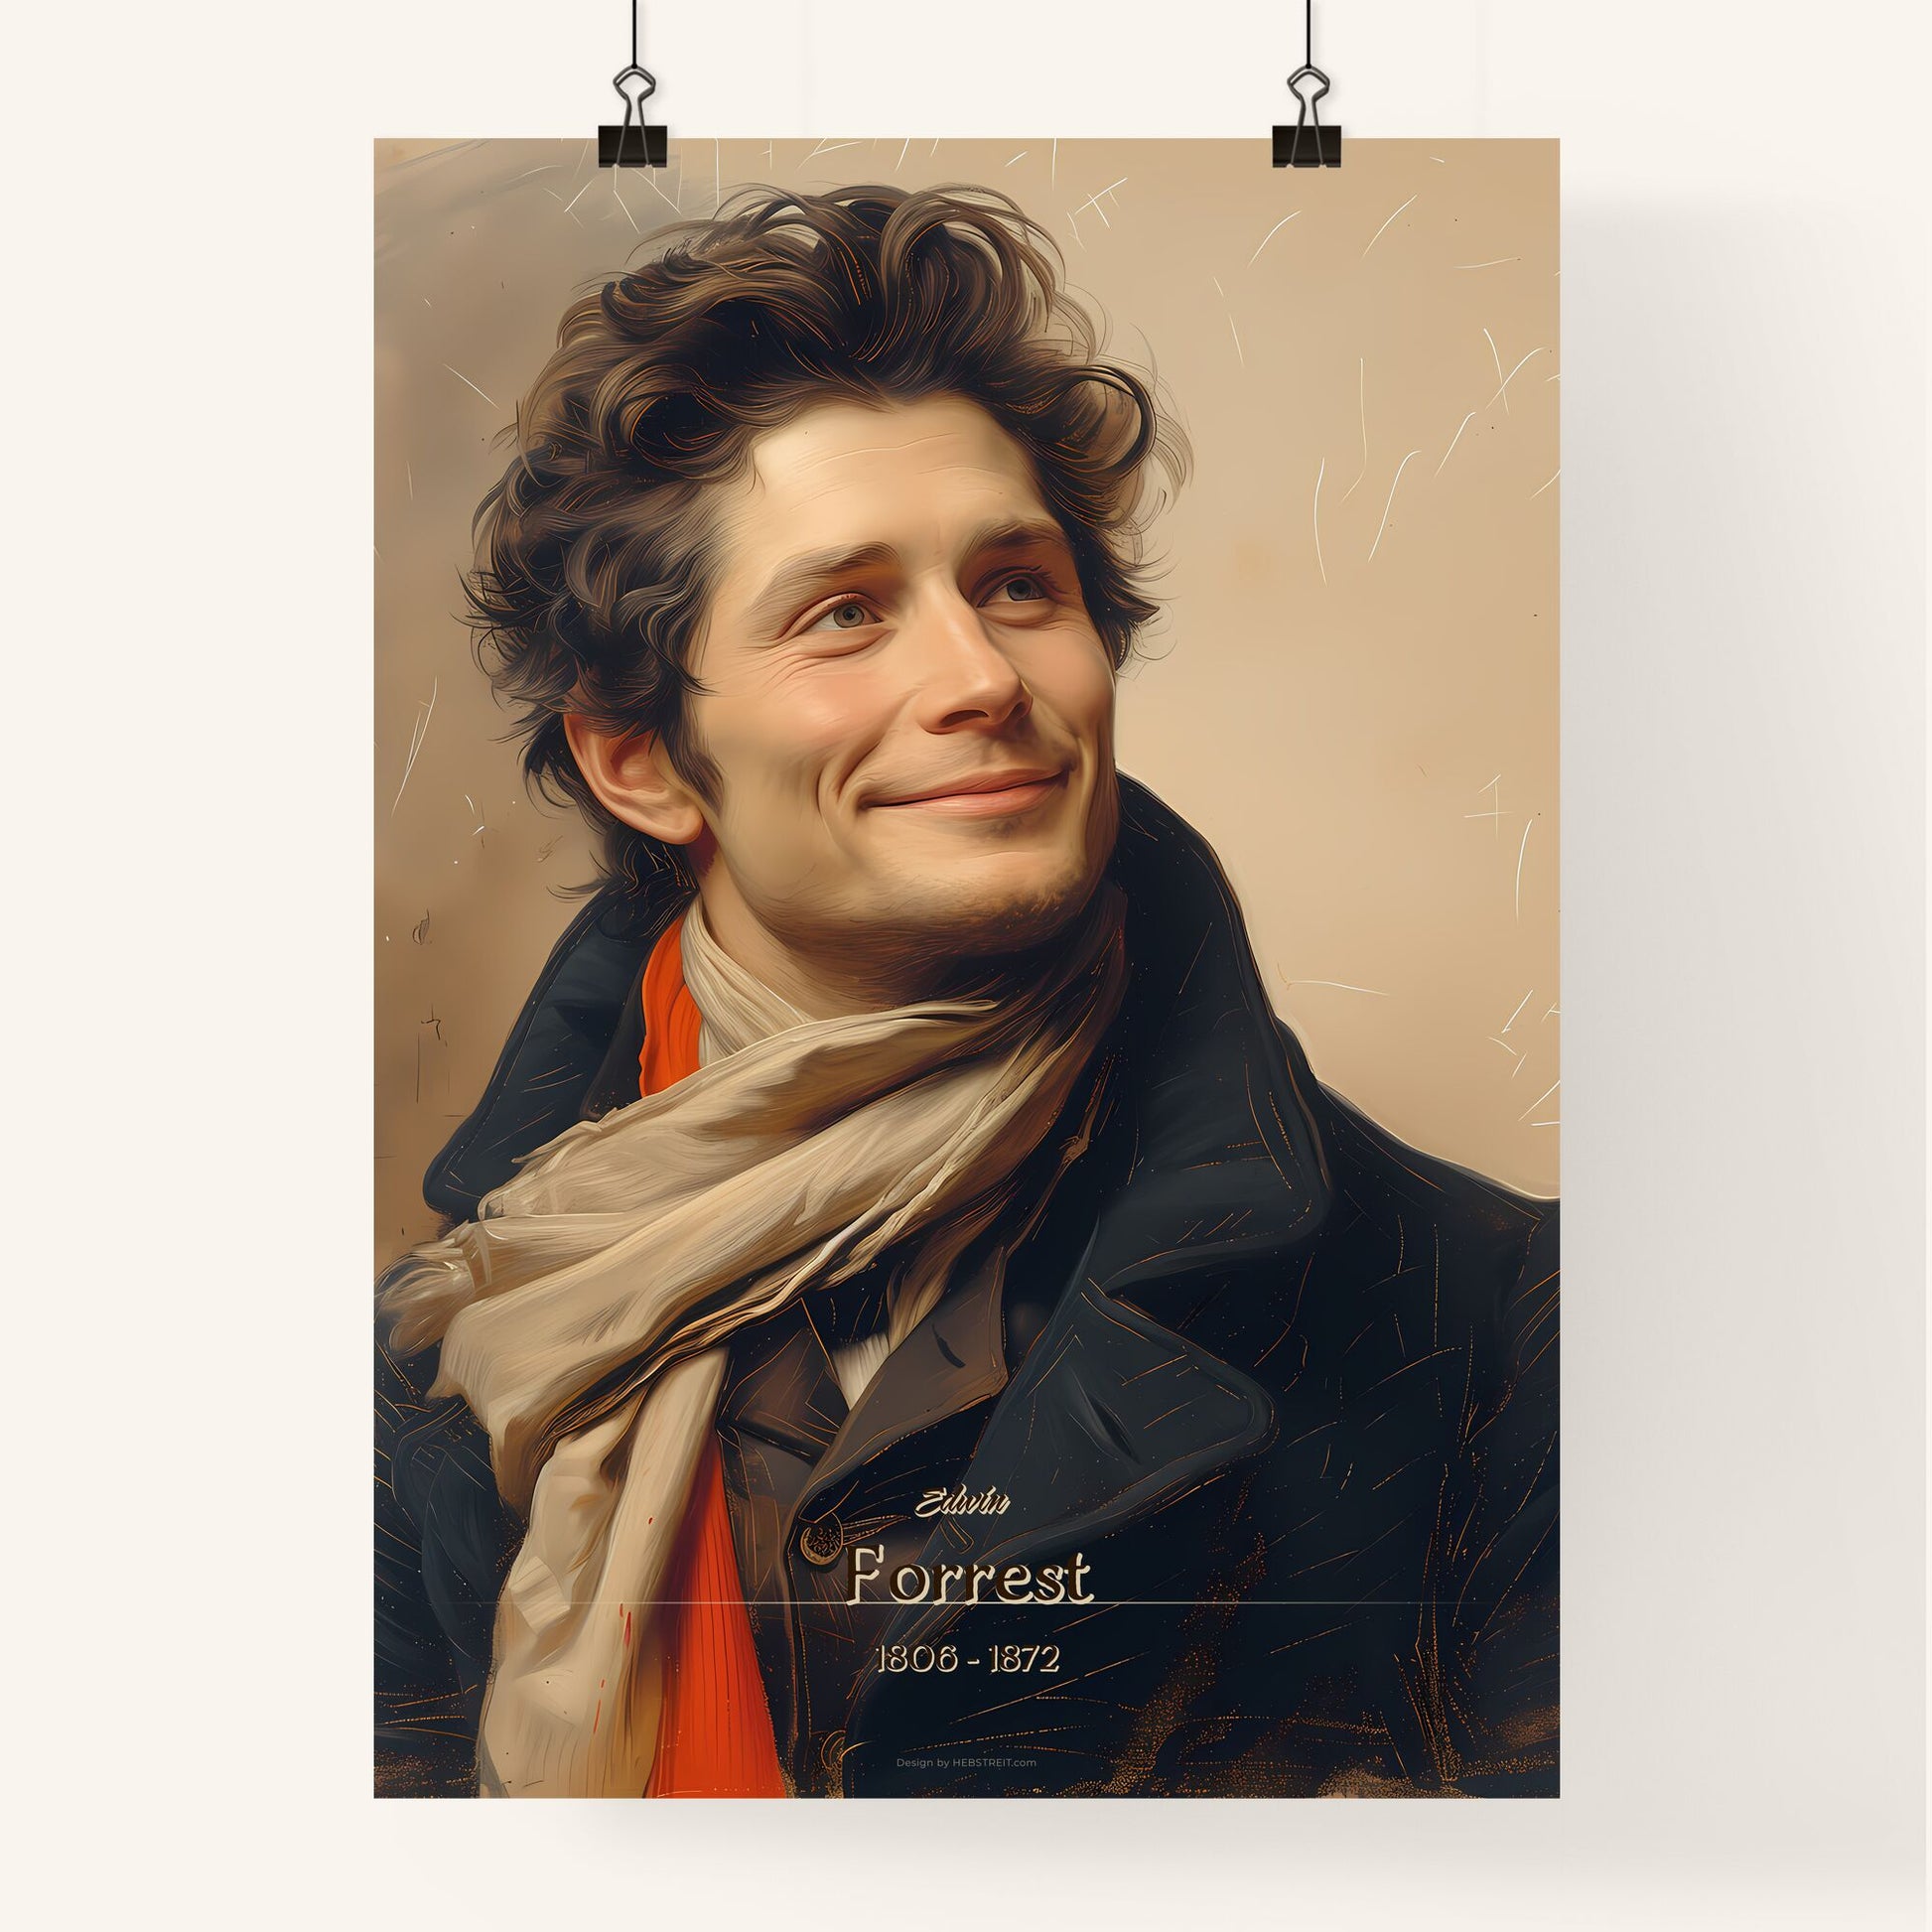 Edwin, Forrest, 1806 - 1872, A Poster of a man in a coat and scarf Default Title